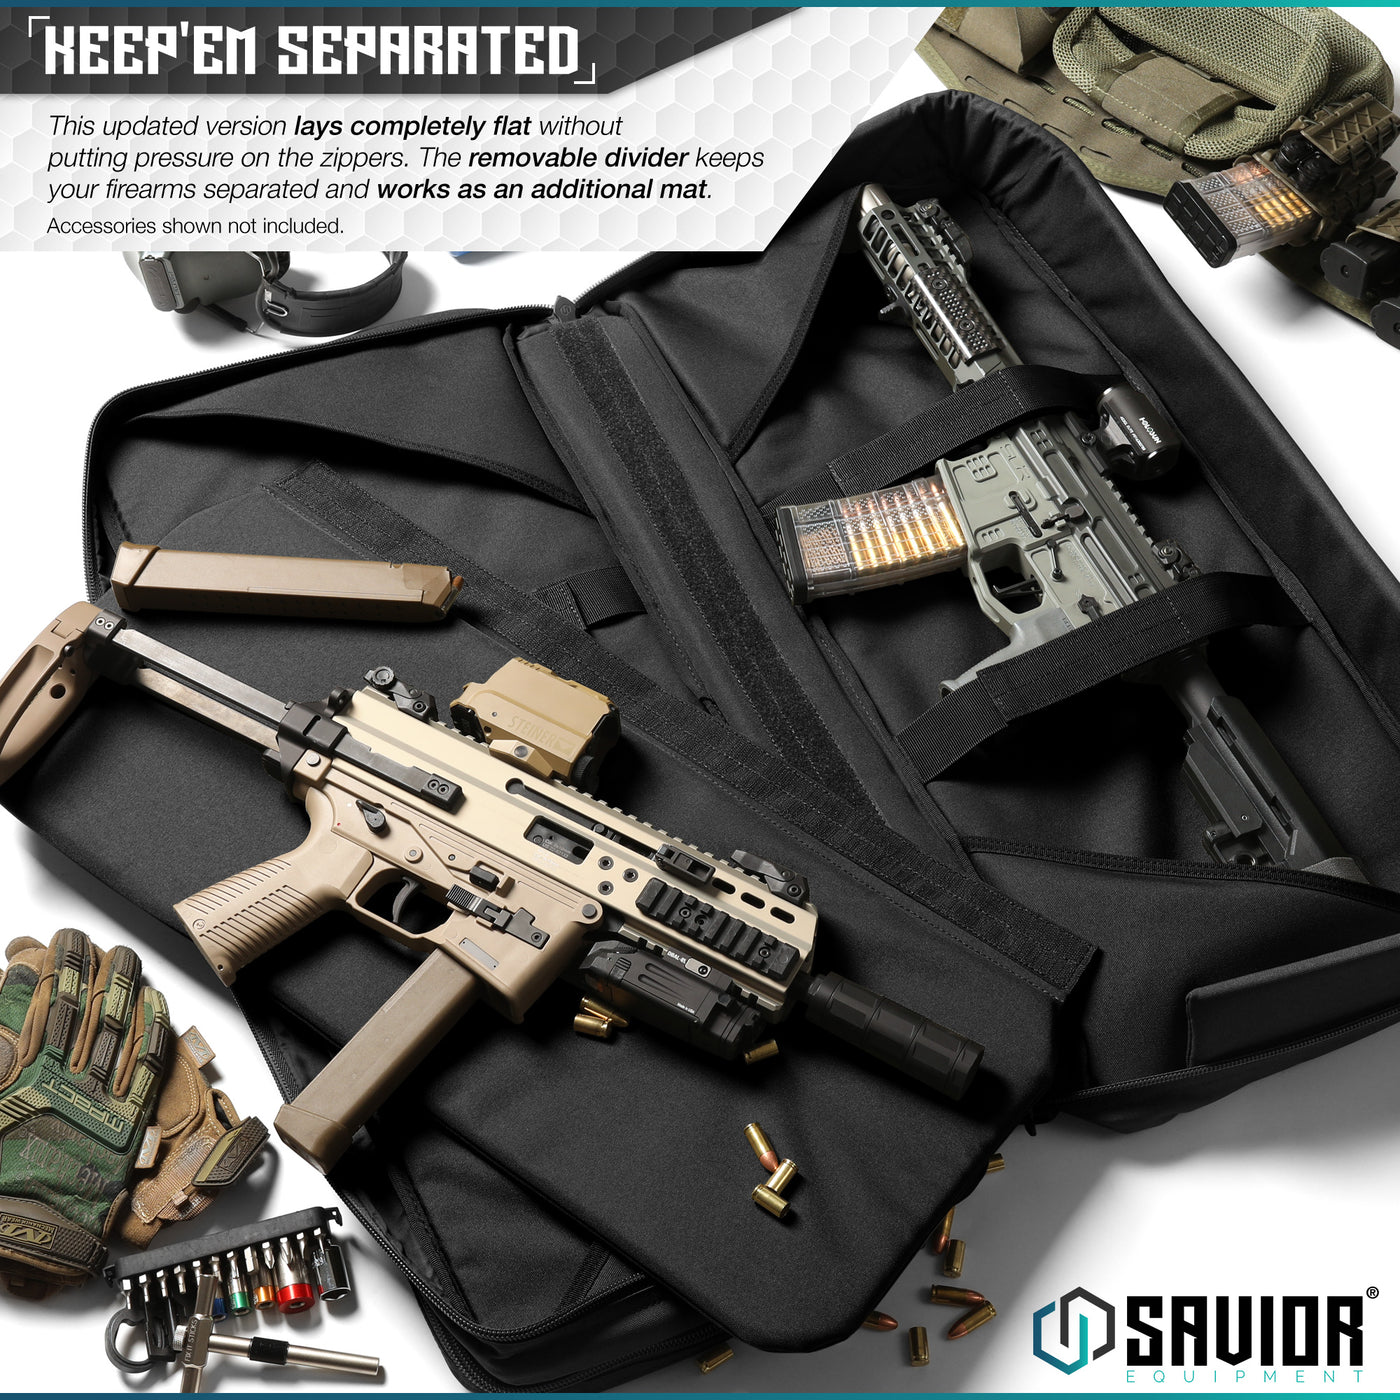 Keep'Em Separated - This updated version lays completely flat without putting pressure on the zippers. The removable divider keeps your firearms separated and works as an additional mat. Accessories shown not included.